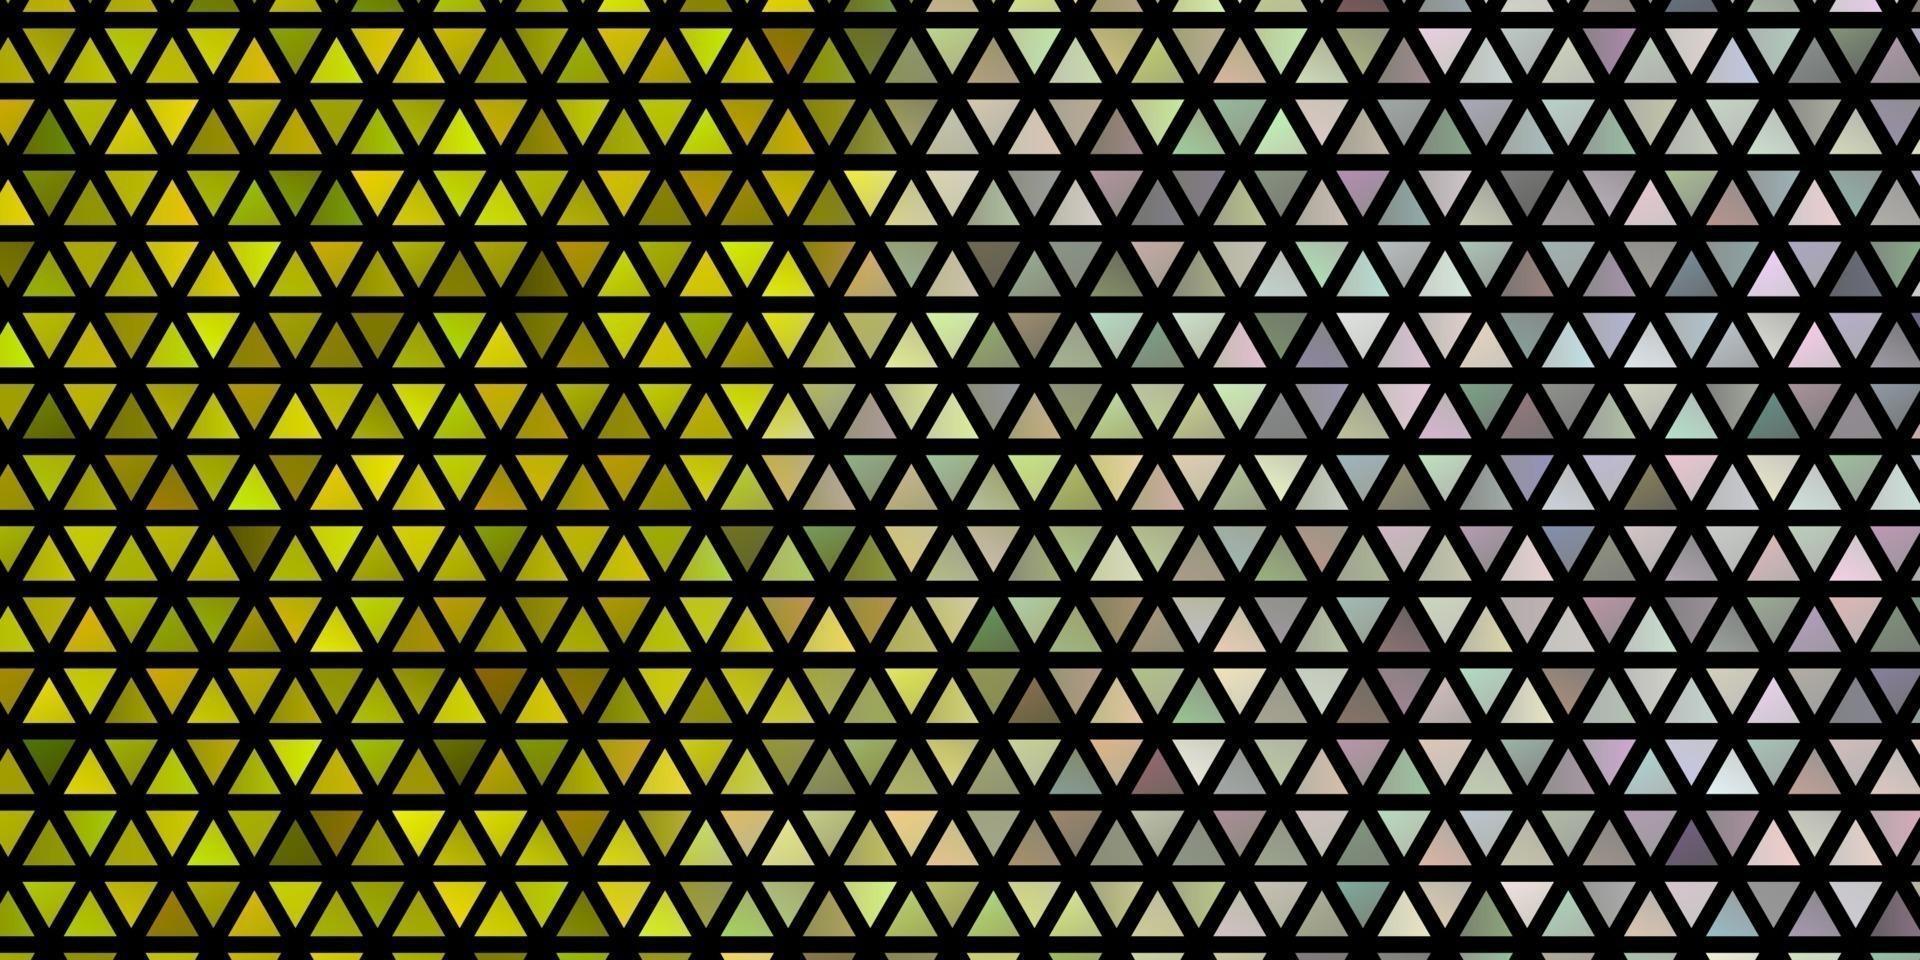 Light Yellow vector layout with lines, triangles.